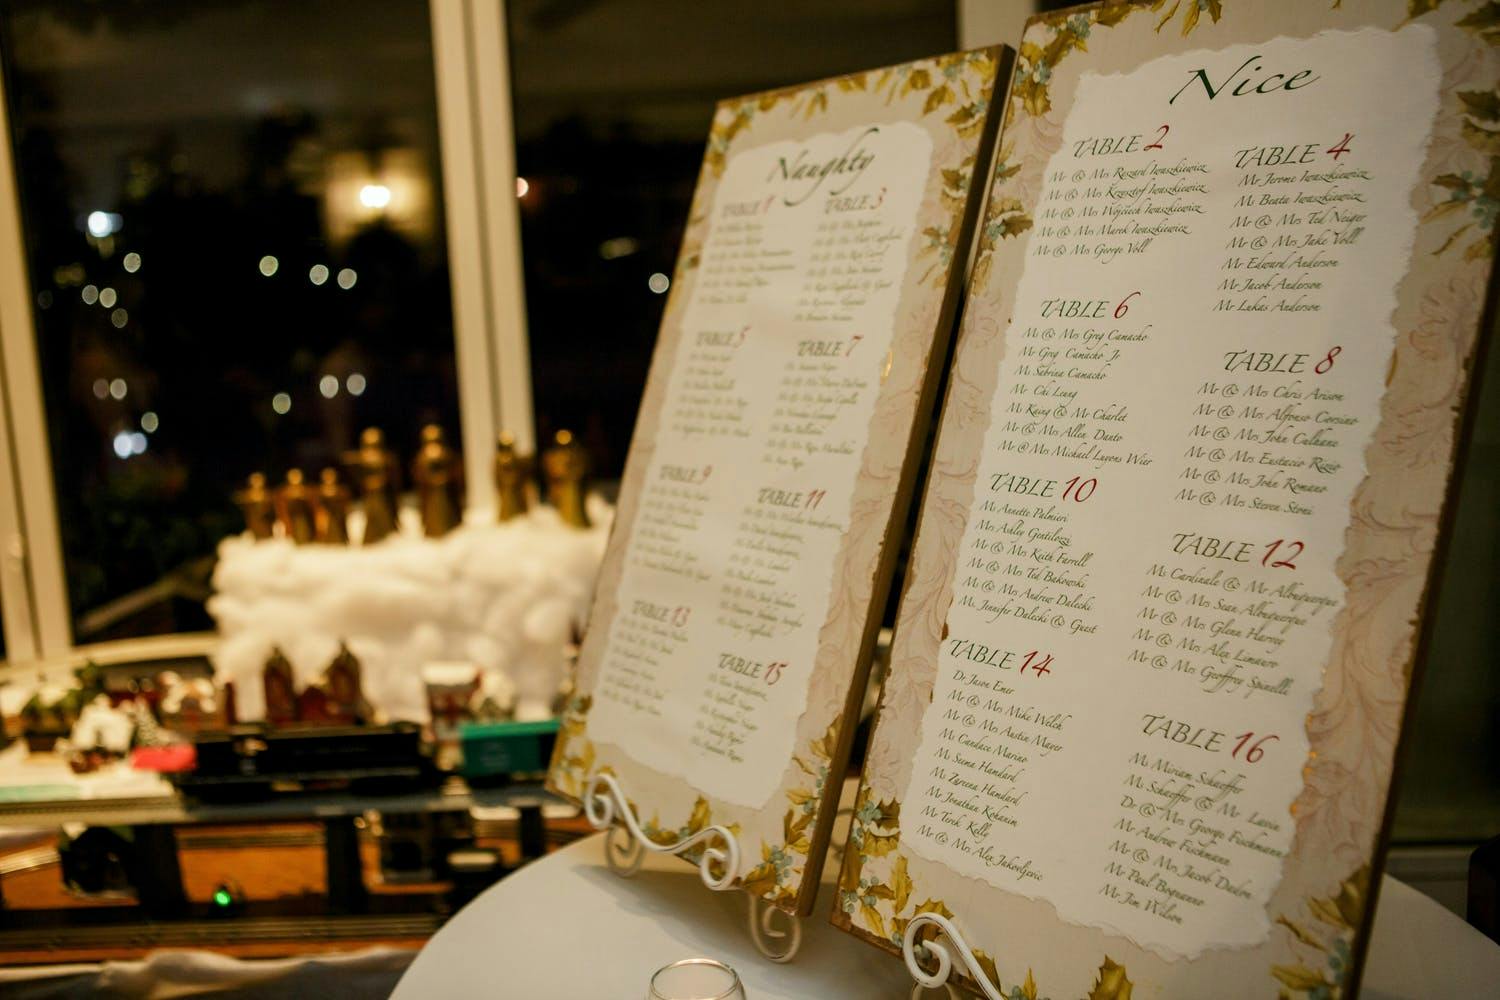 Gold-Edged Wedding Seating Chart With Poinsettia Designs for Christmas Wedding | PartySlate